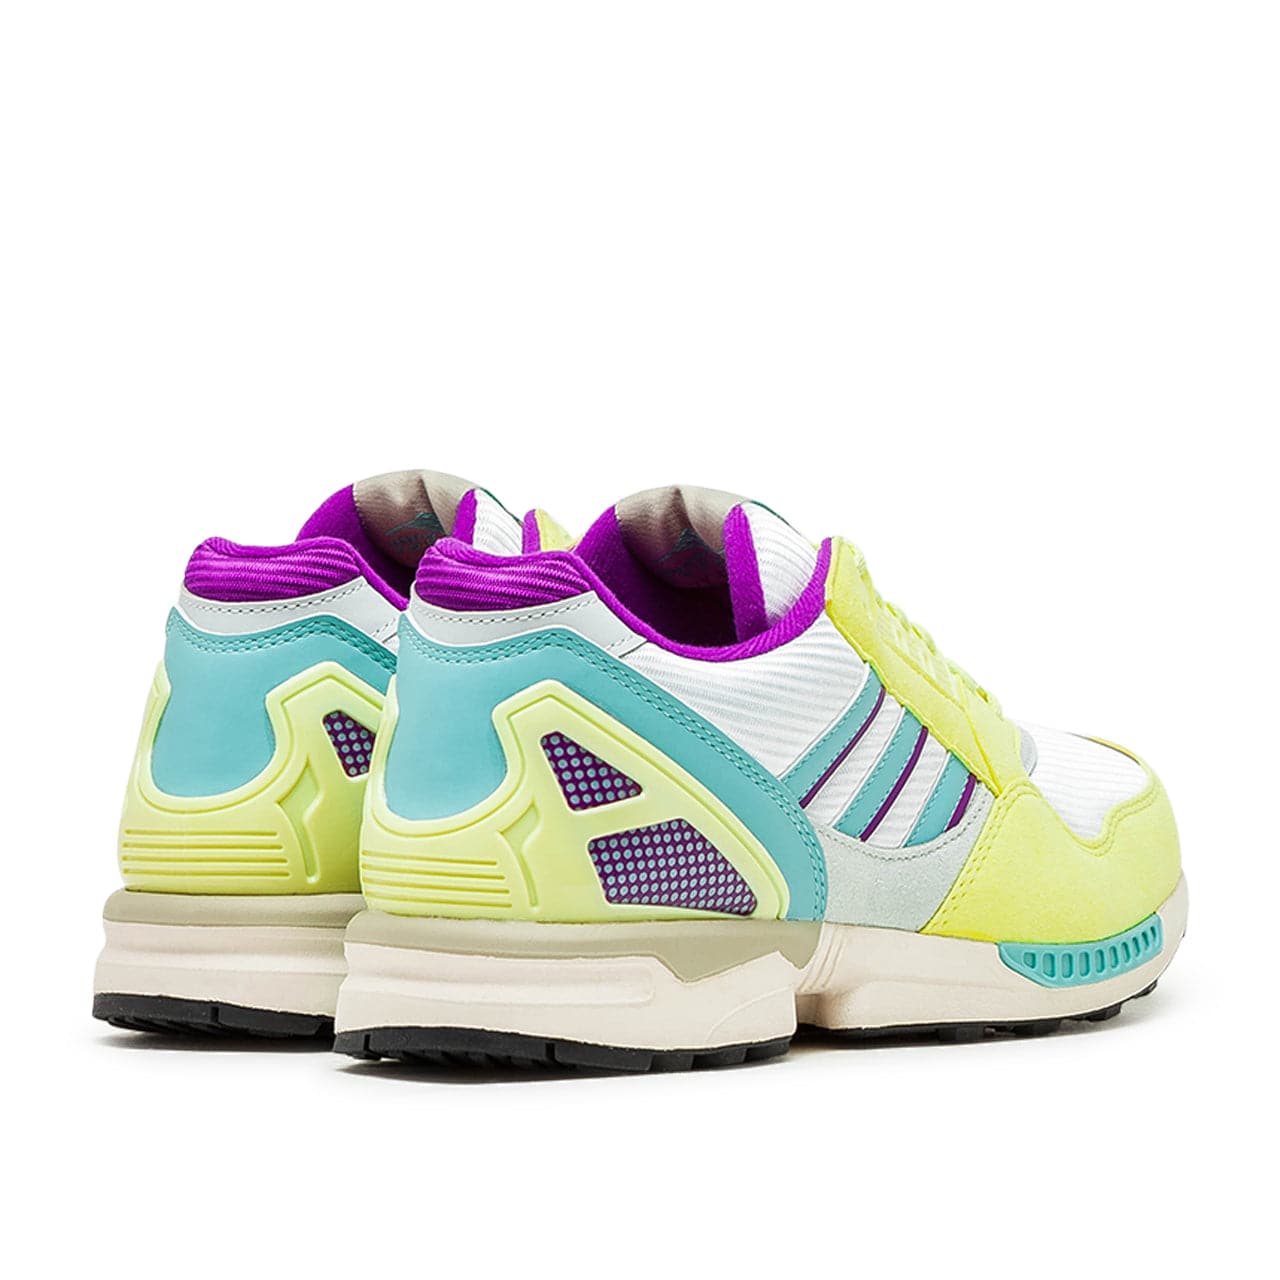 adidas ZX 9000 Citrus 'Bring Back Pack' (Yellow / Green / Purple)